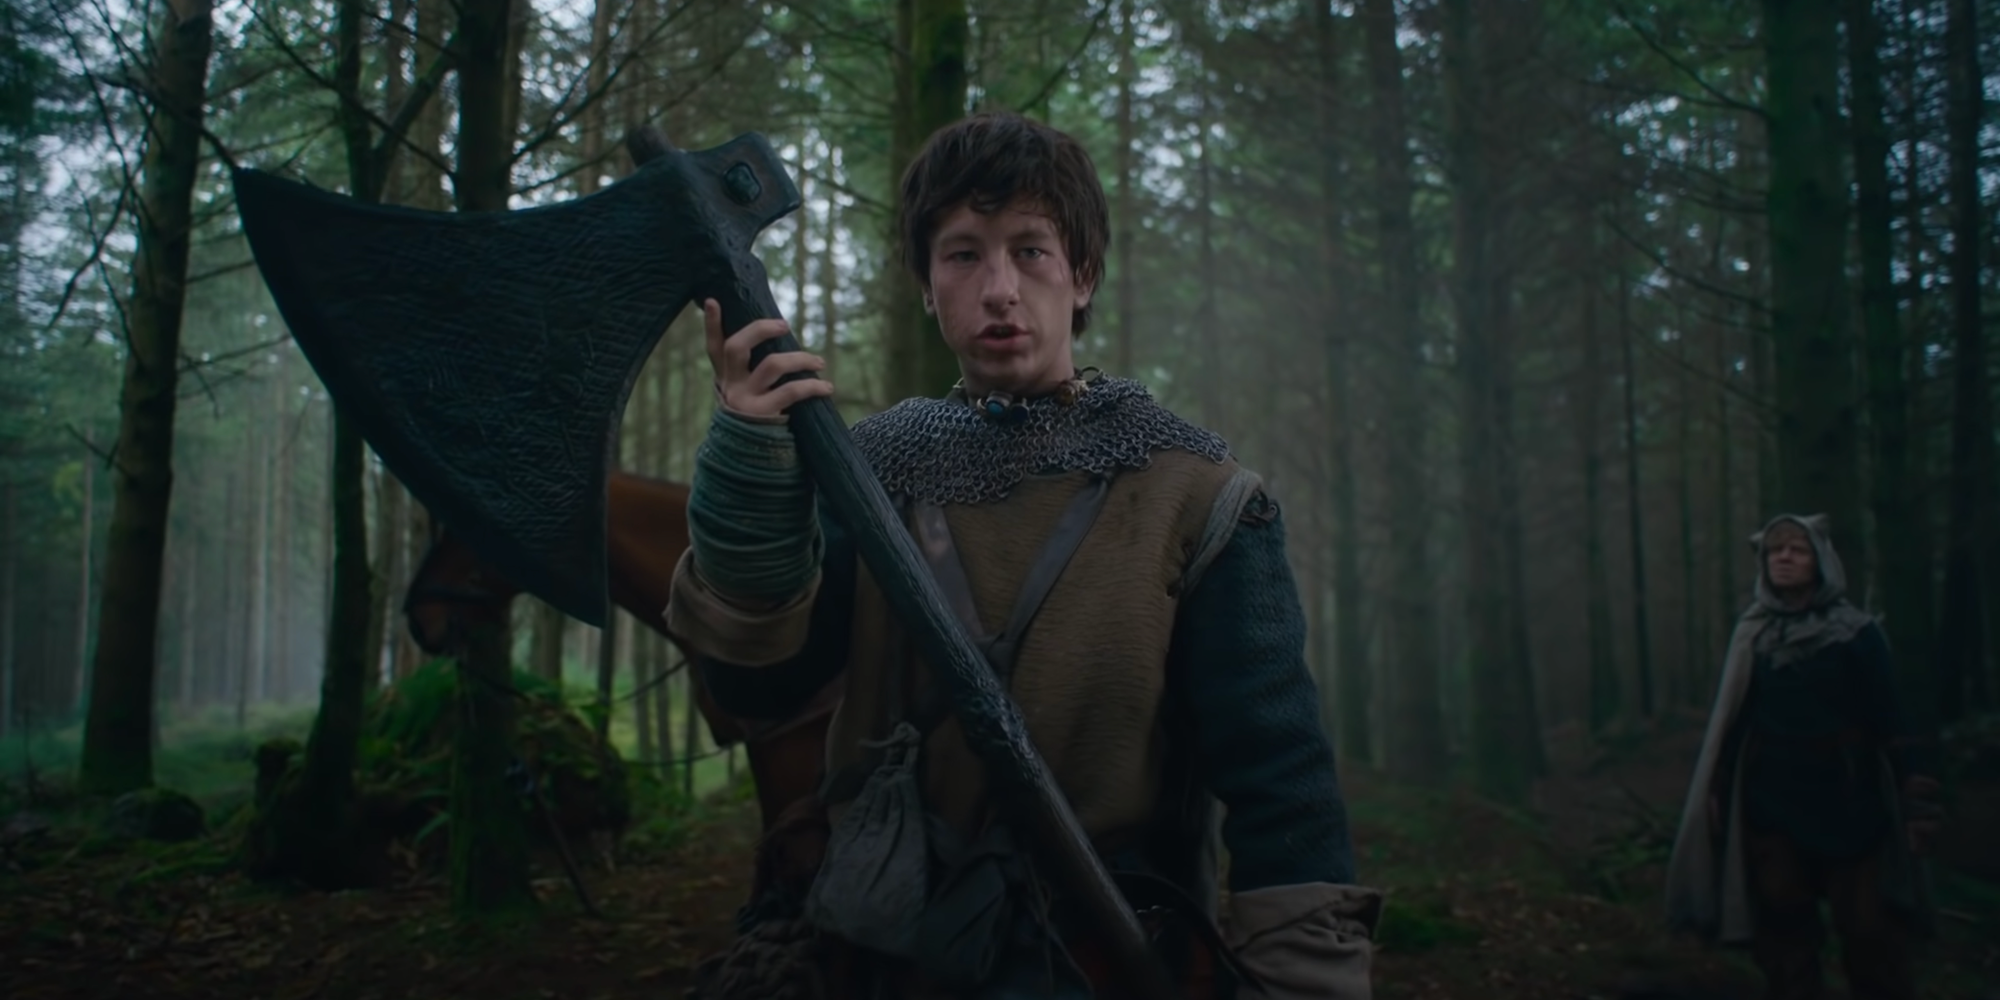 Barry Keoghan as the Scavenger in the Woods with an Axe in The Green Knight